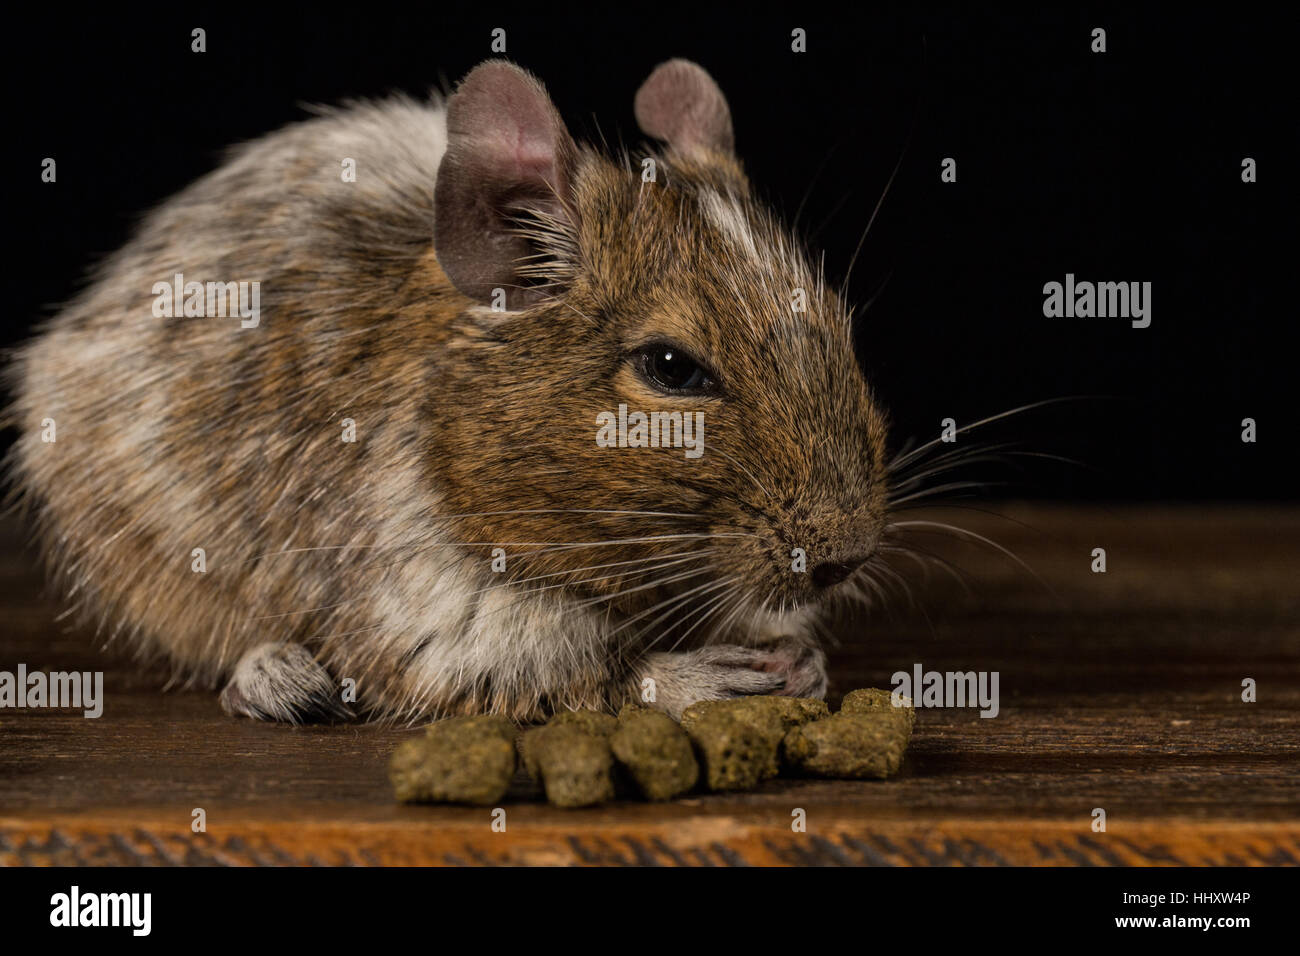 male degu sat on a wooden stool eating food photographed in a studio against a black background Stock Photo